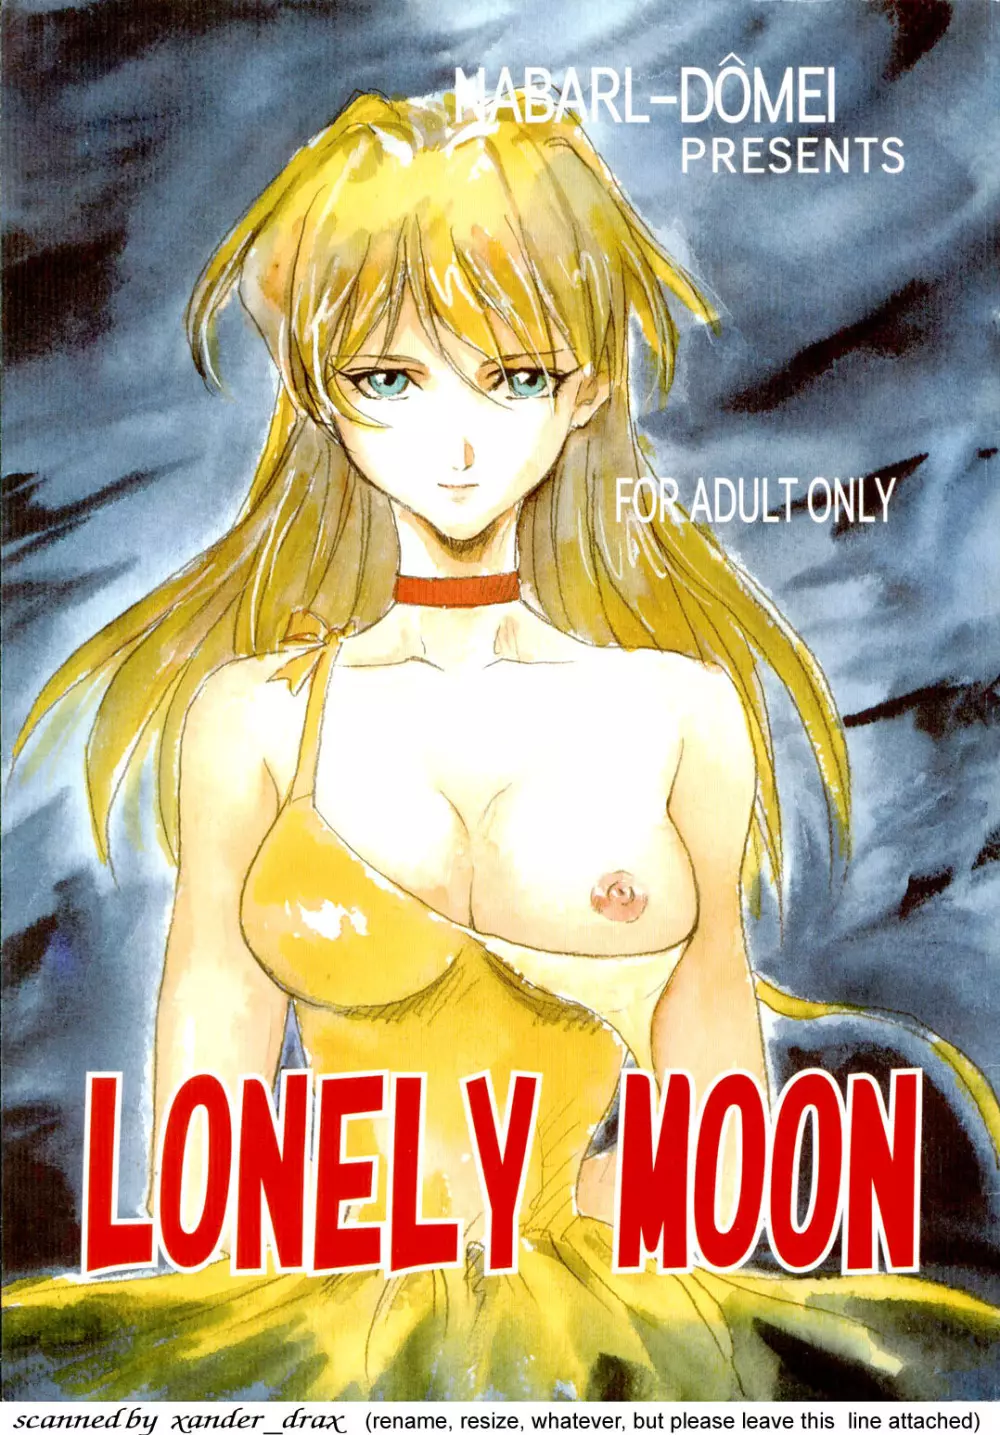 LONELY MOON